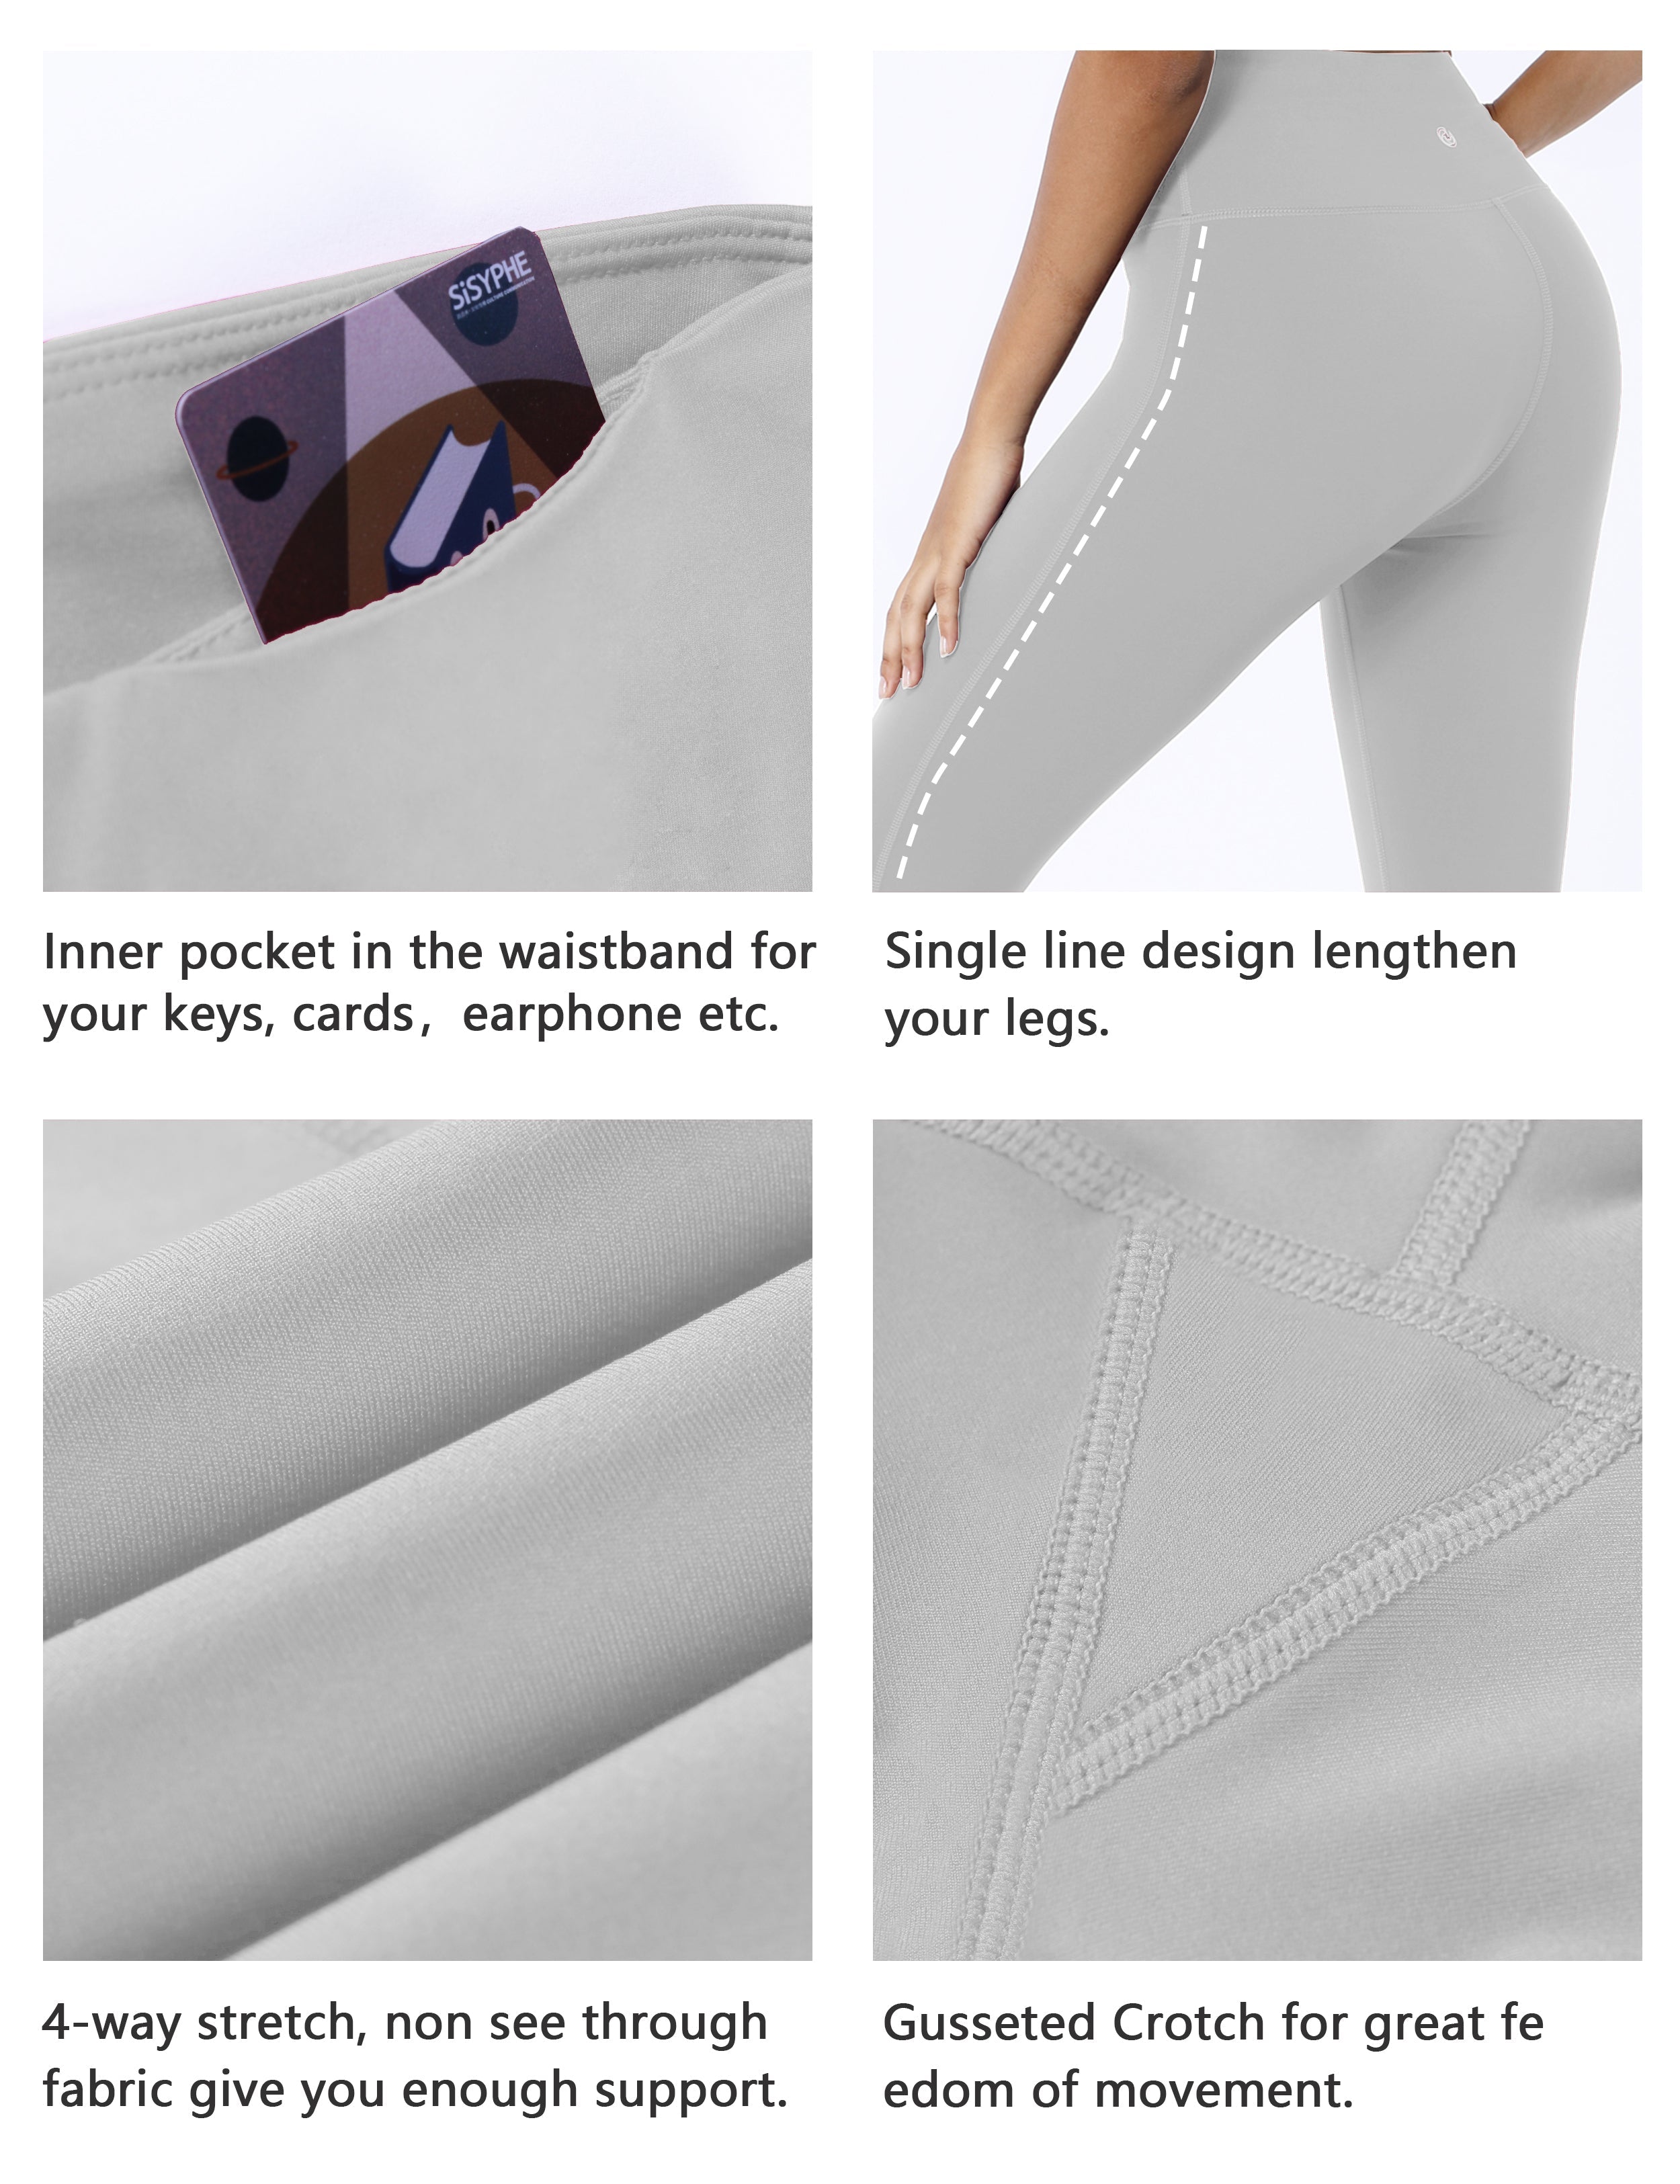 High Waist Side Line Golf Pants lightgray Side Line is Make Your Legs Look Longer and Thinner 75%Nylon/25%Spandex Fabric doesn't attract lint easily 4-way stretch No see-through Moisture-wicking Tummy control Inner pocket Two lengths